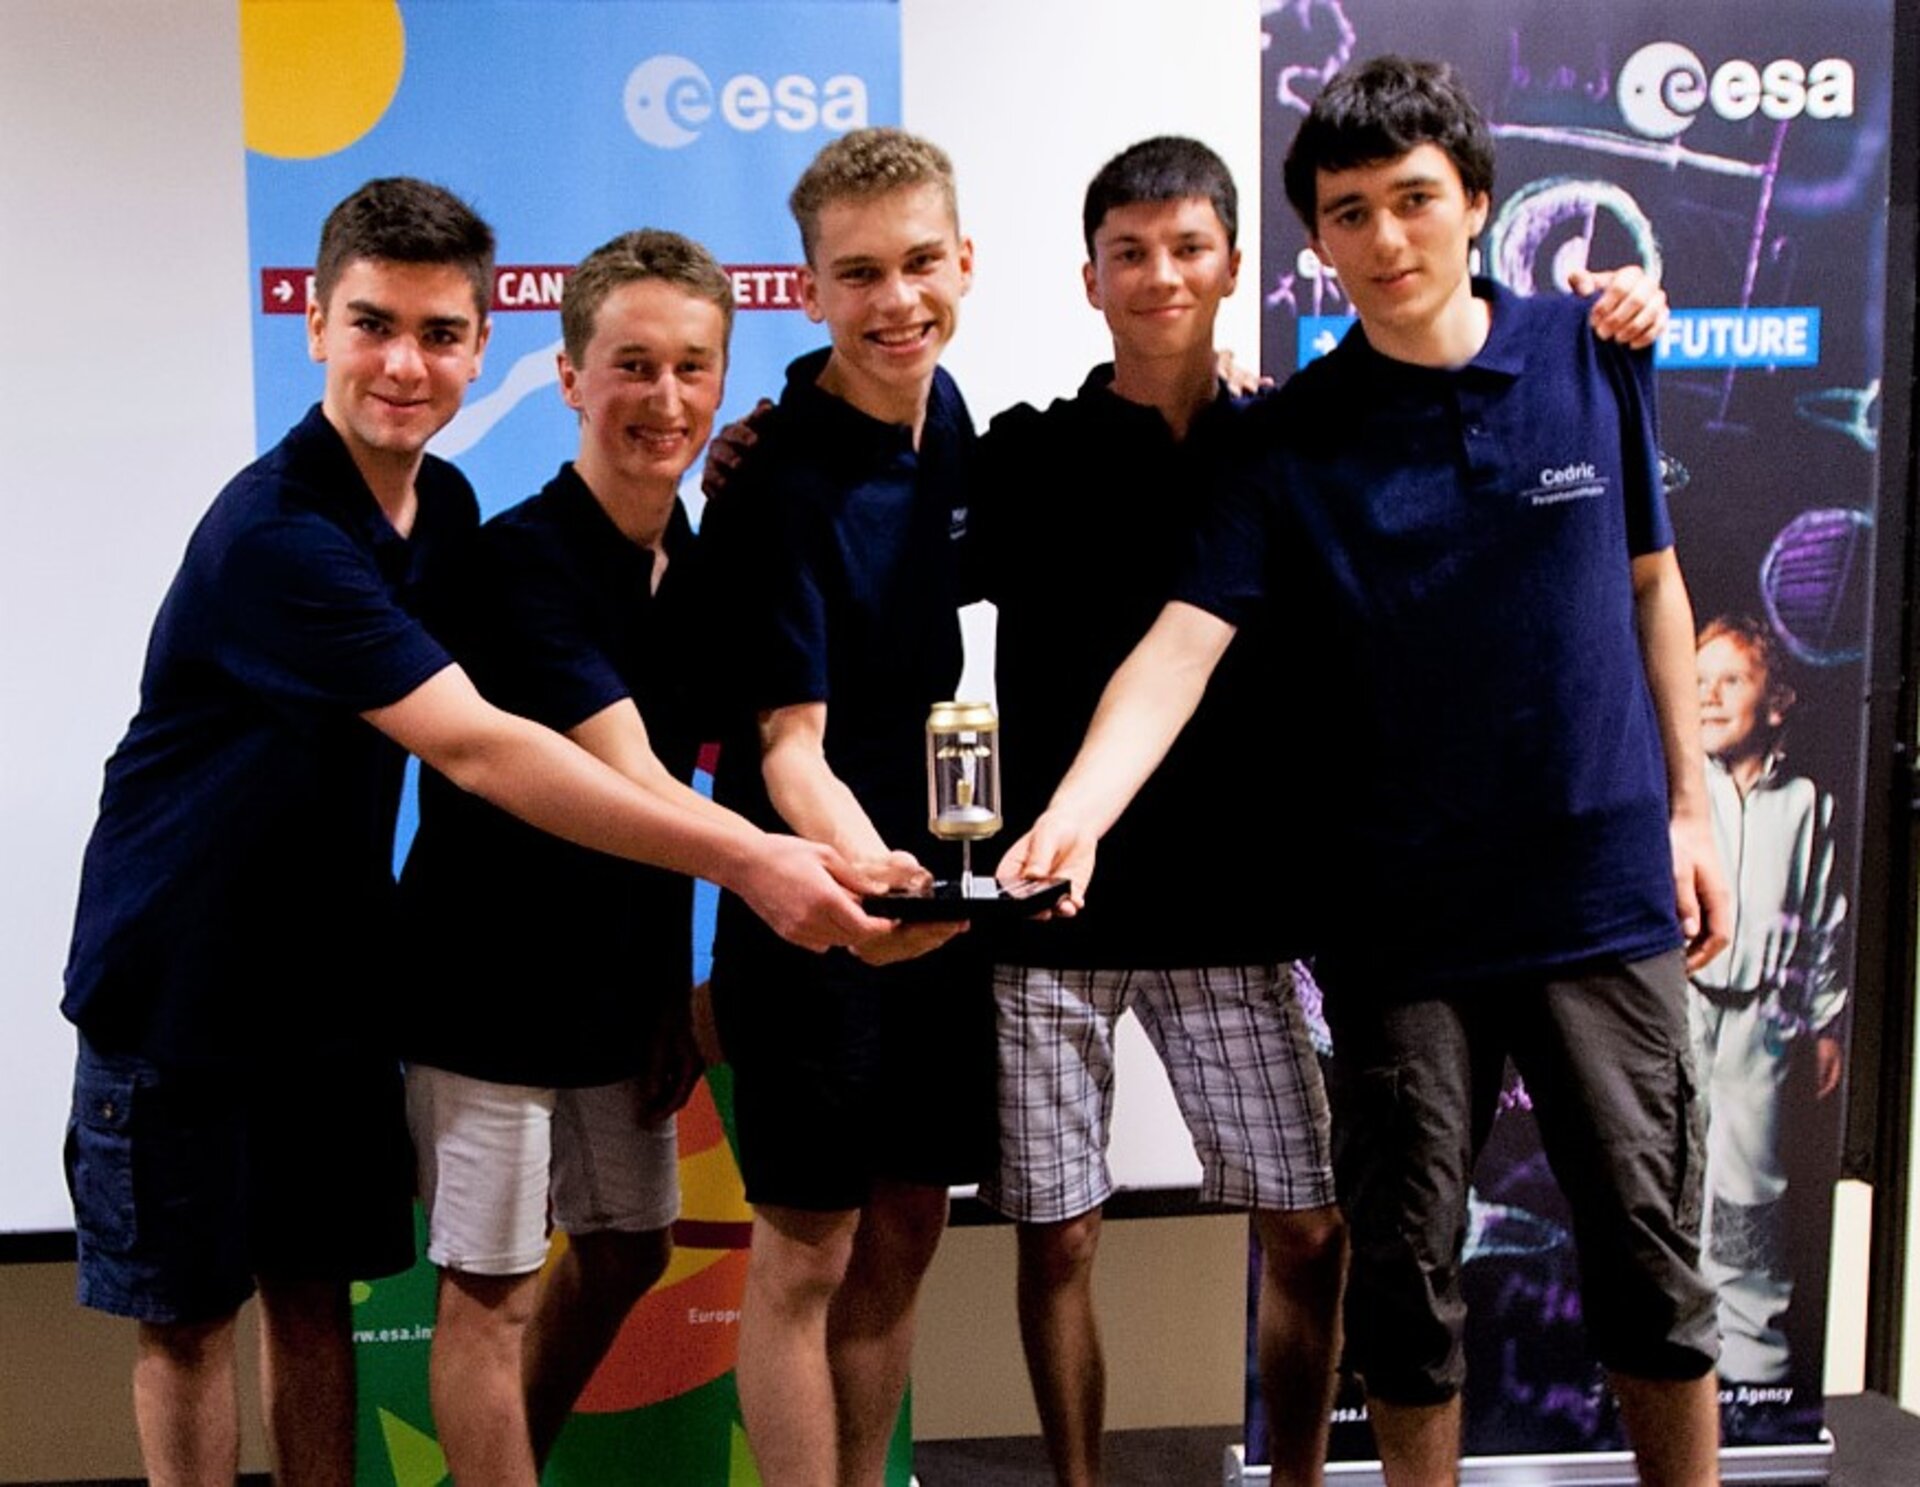 Team PerpetuumMobile from Germany winning the Best CanSat Project 2019